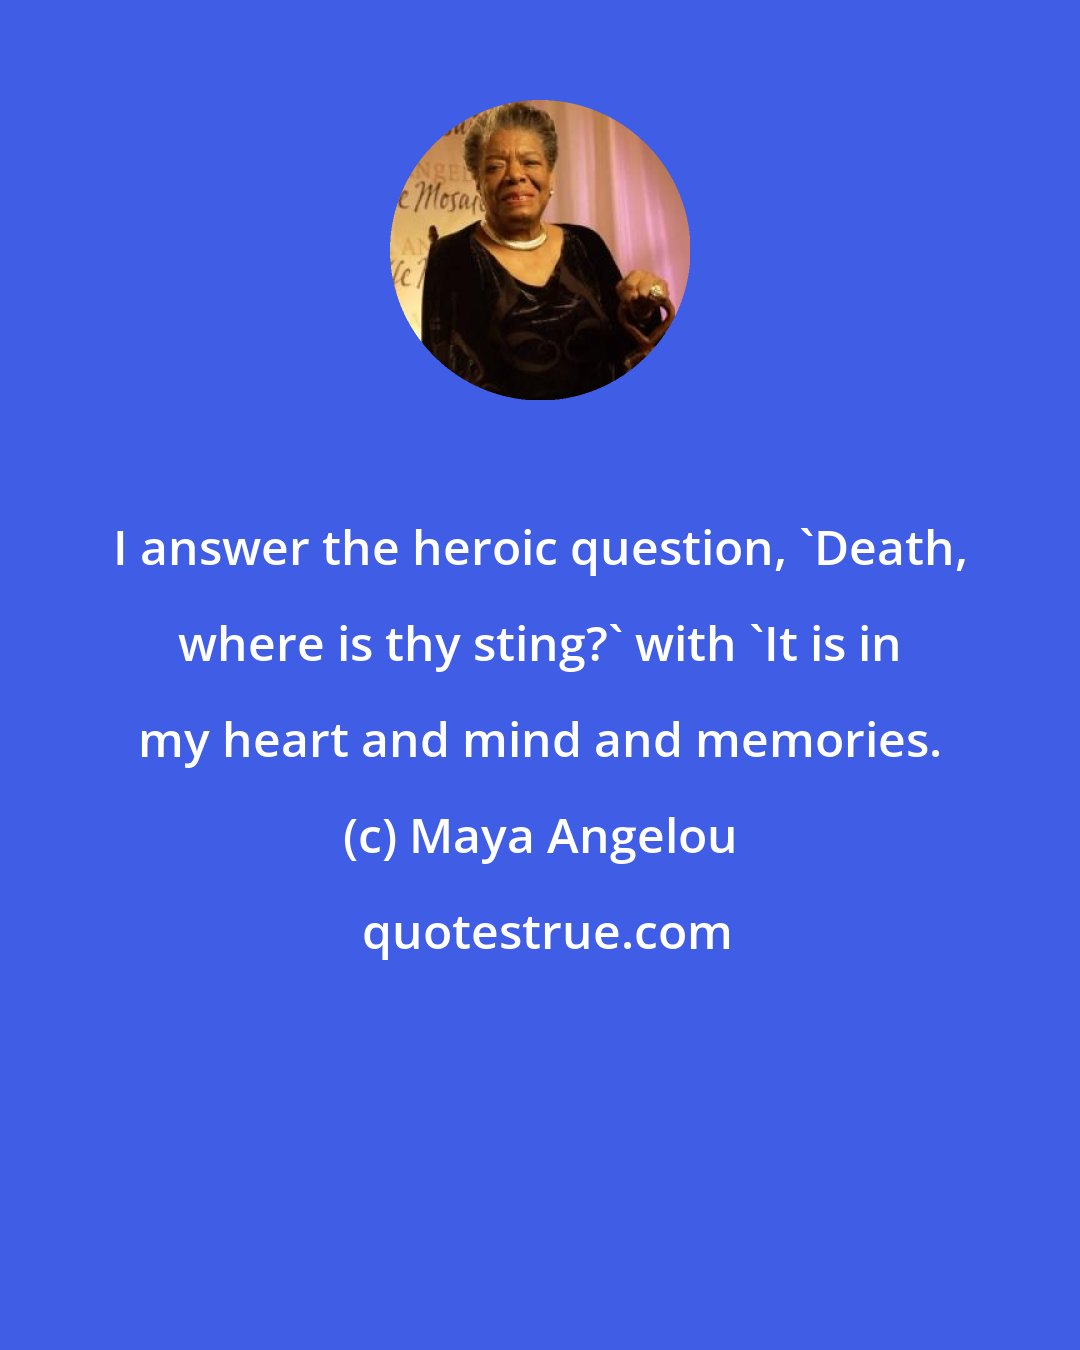 Maya Angelou: I answer the heroic question, 'Death, where is thy sting?' with 'It is in my heart and mind and memories.